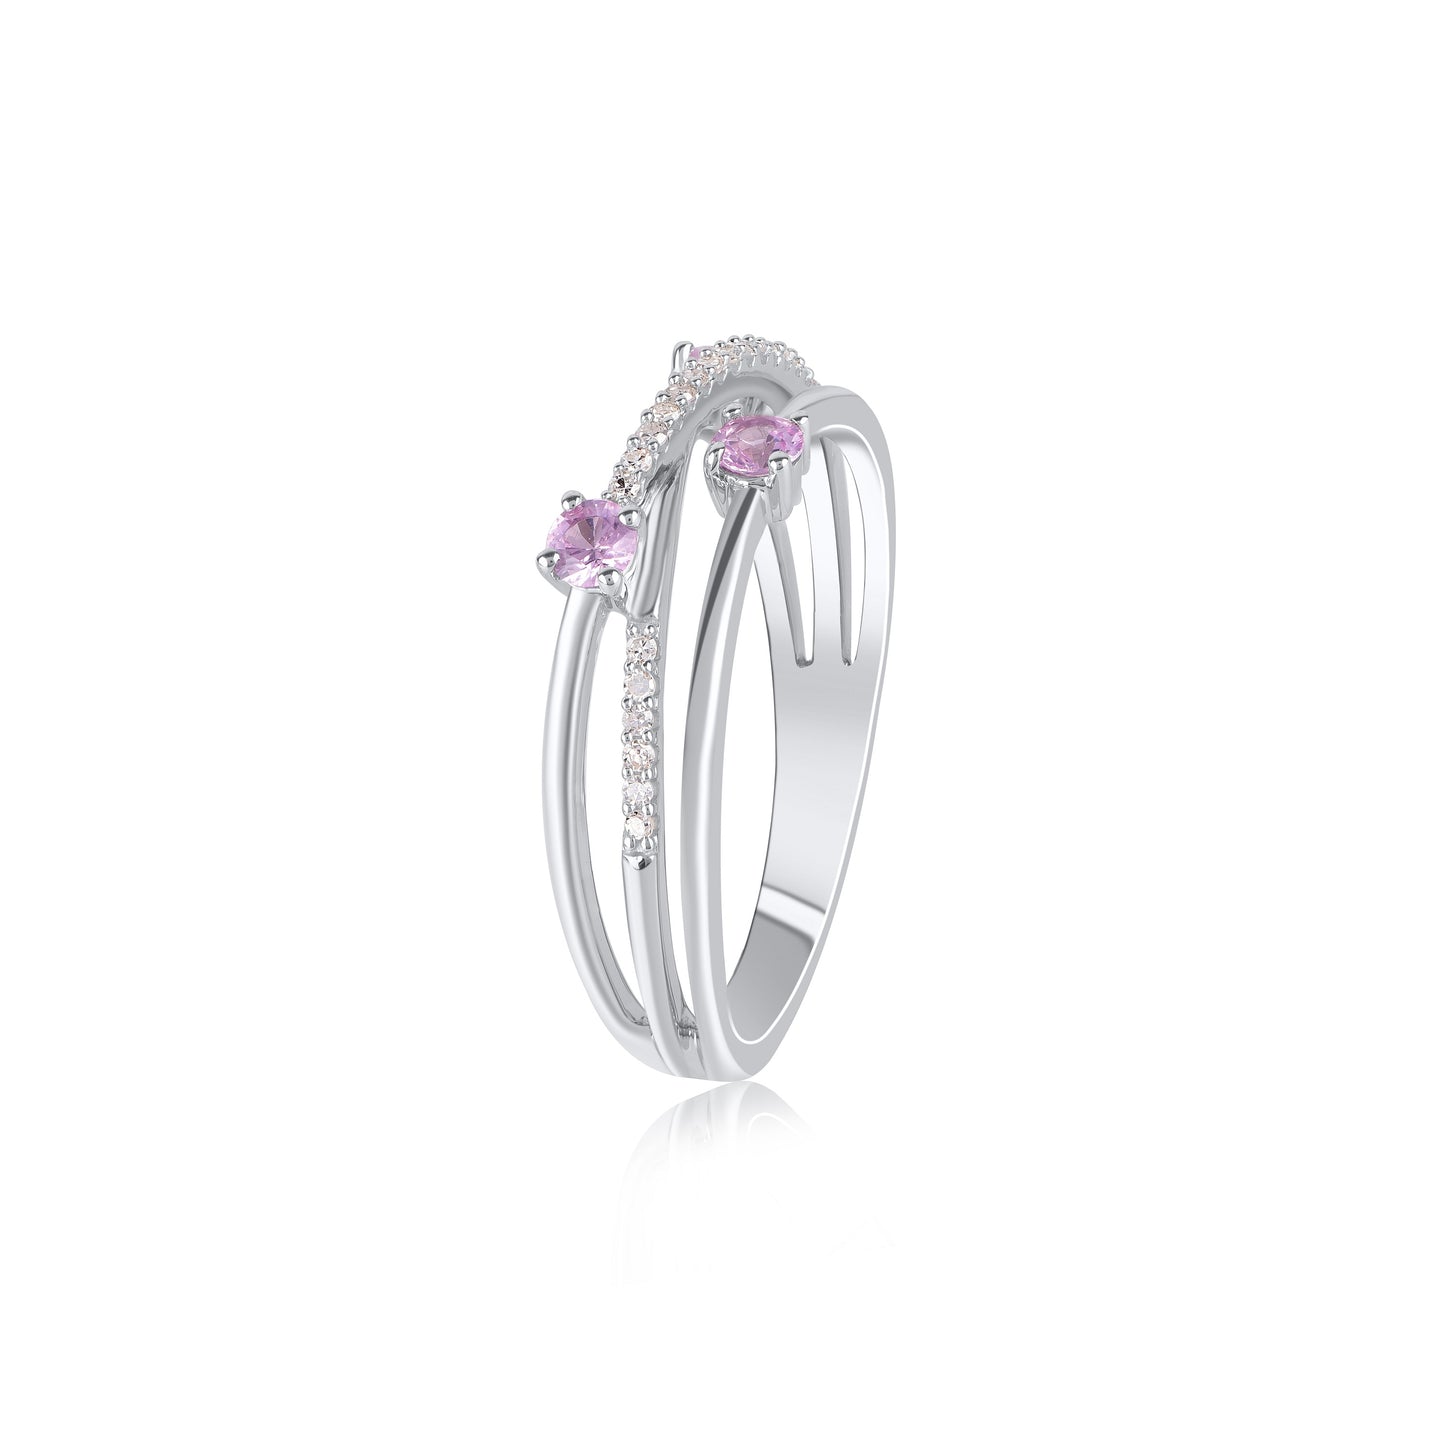 Diamond and Pink Sapphire Crisscross Ring in 10K Gold